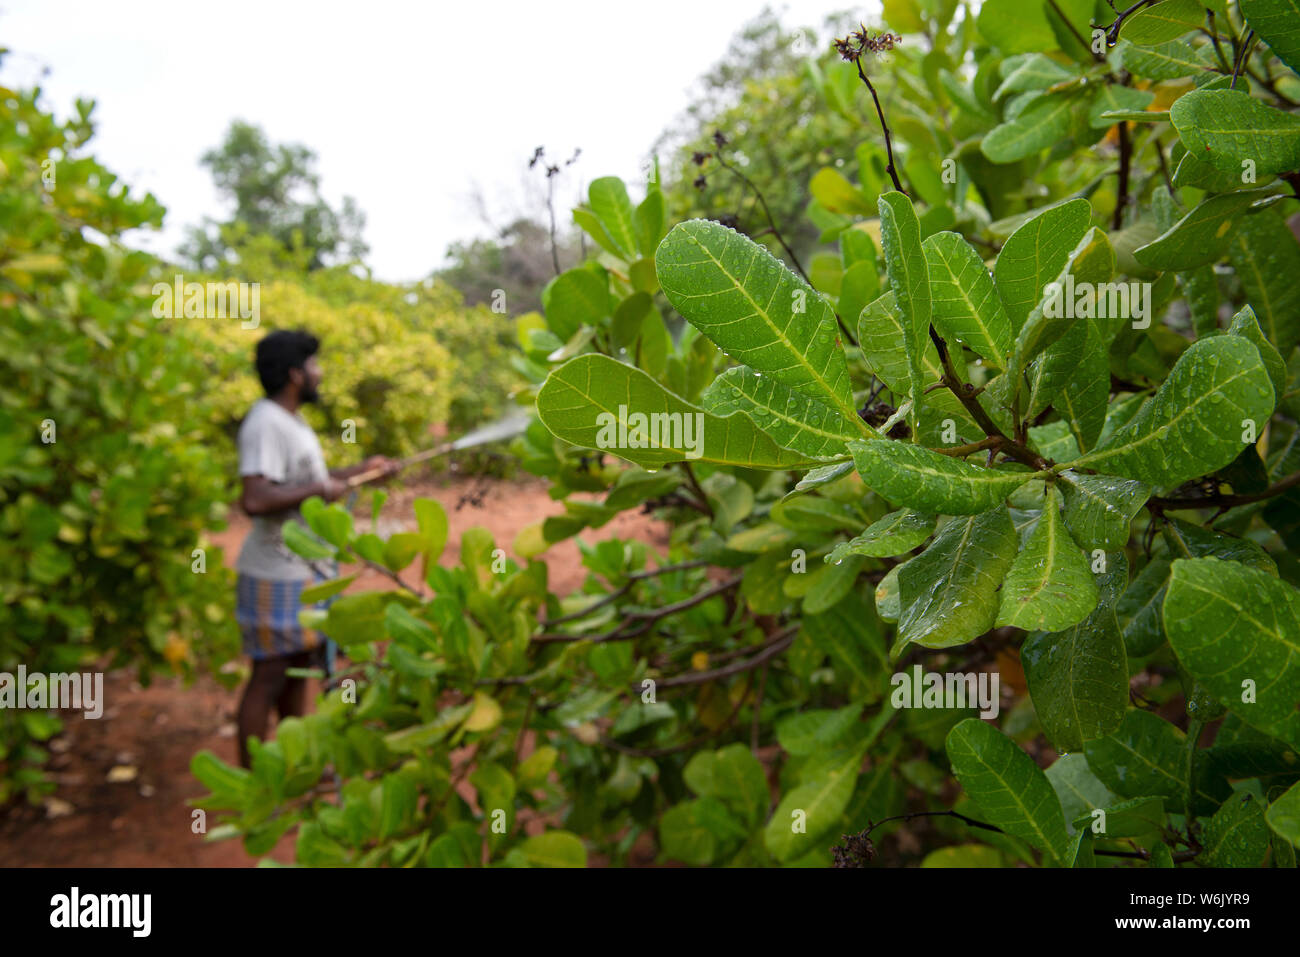 TAMIL NADU, INDIA: February 2019: Cashew spraying with endosulfan pesticide is very dangerous for the health. Stock Photo